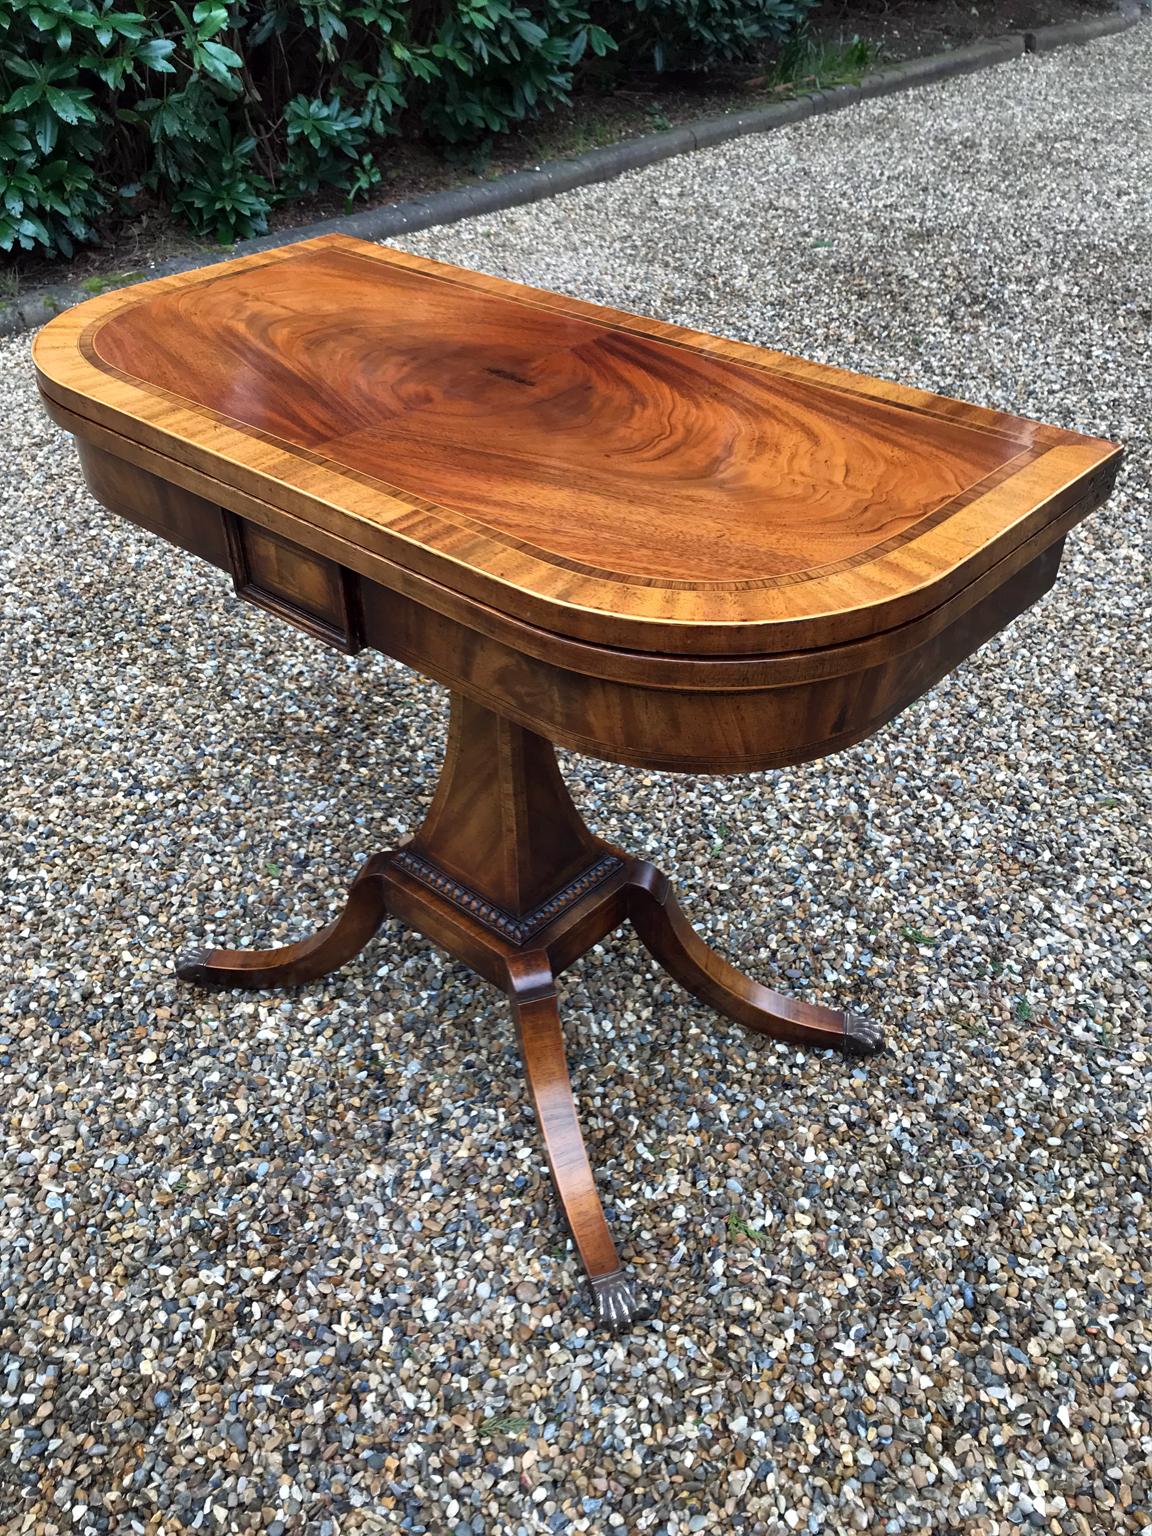 An original 19th century Regency inlaid crossbanded D-shaped mahogany card table with baize interior. Raised on a tempered chamfered column and splayed leg supports ending with brass claw feet and castors. The top swivels open to become a card